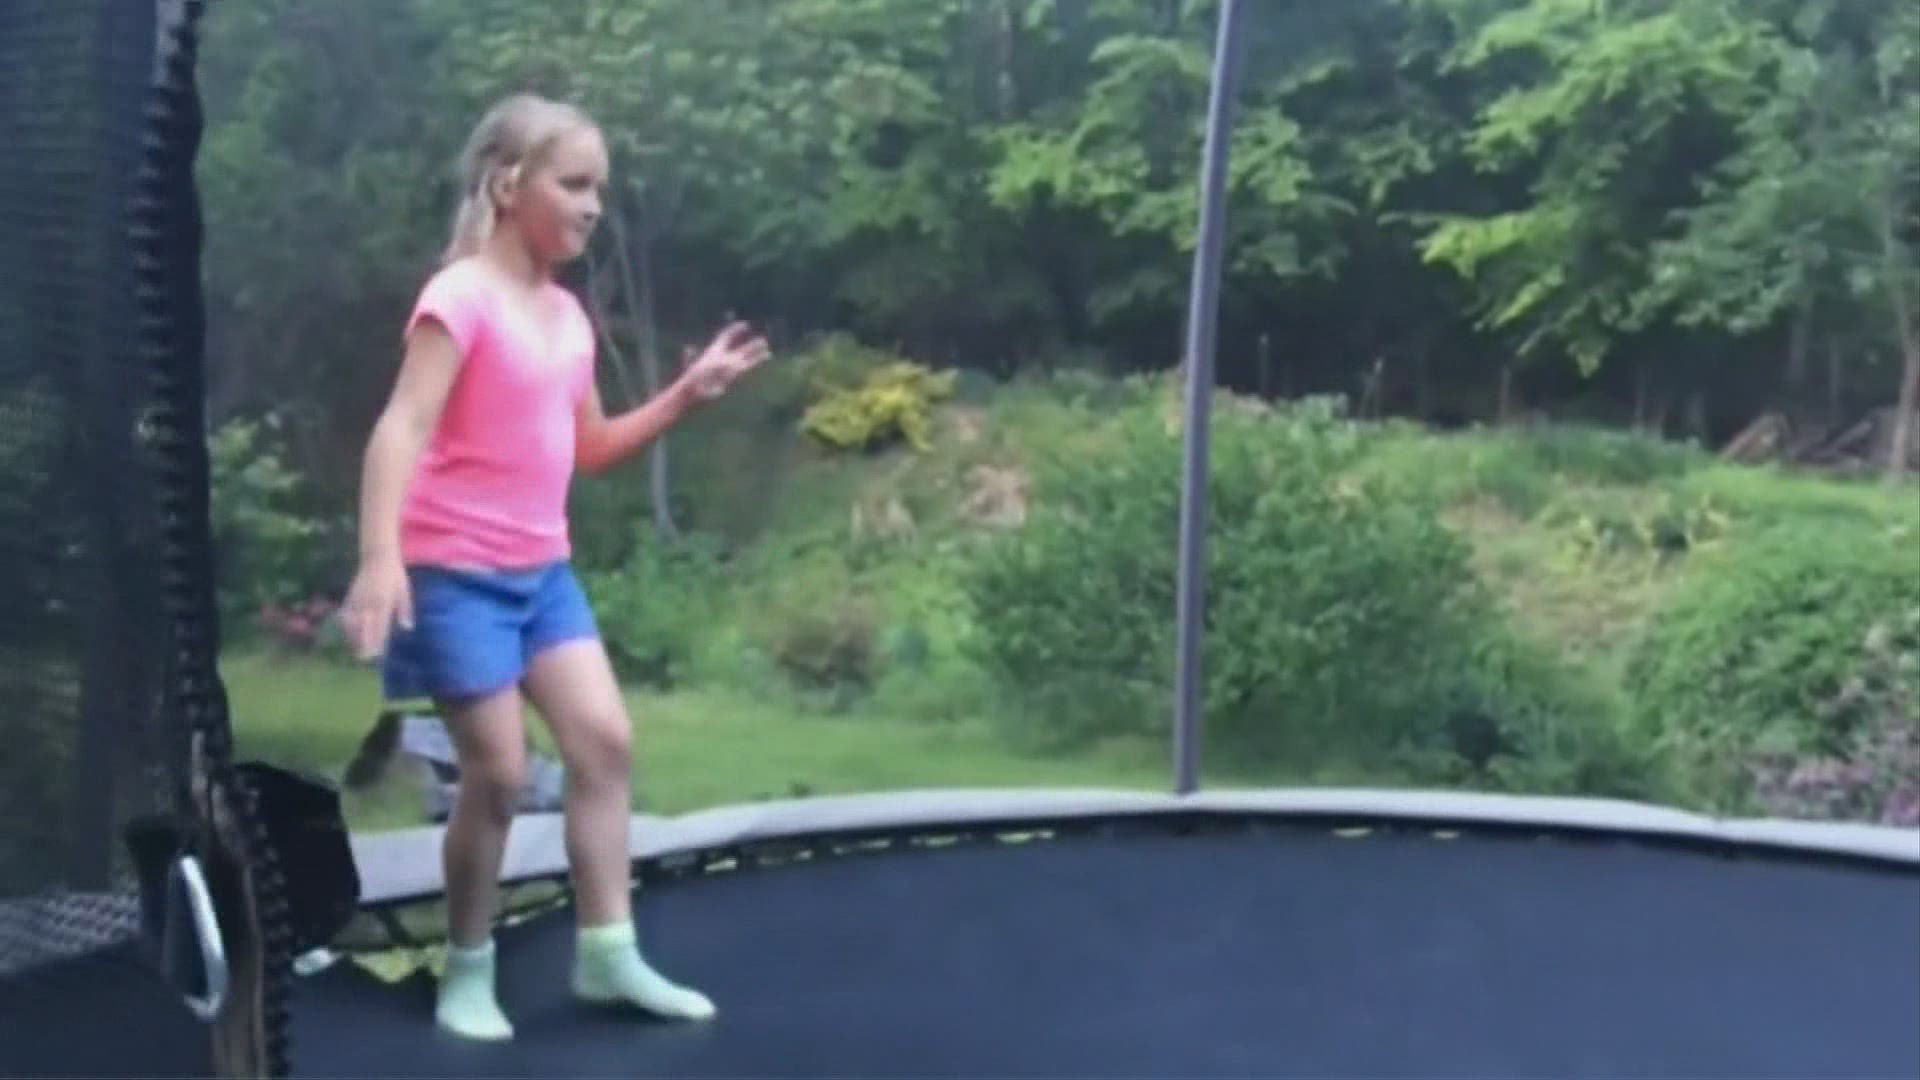 10TV talks to experts about the dangers of trampolines.